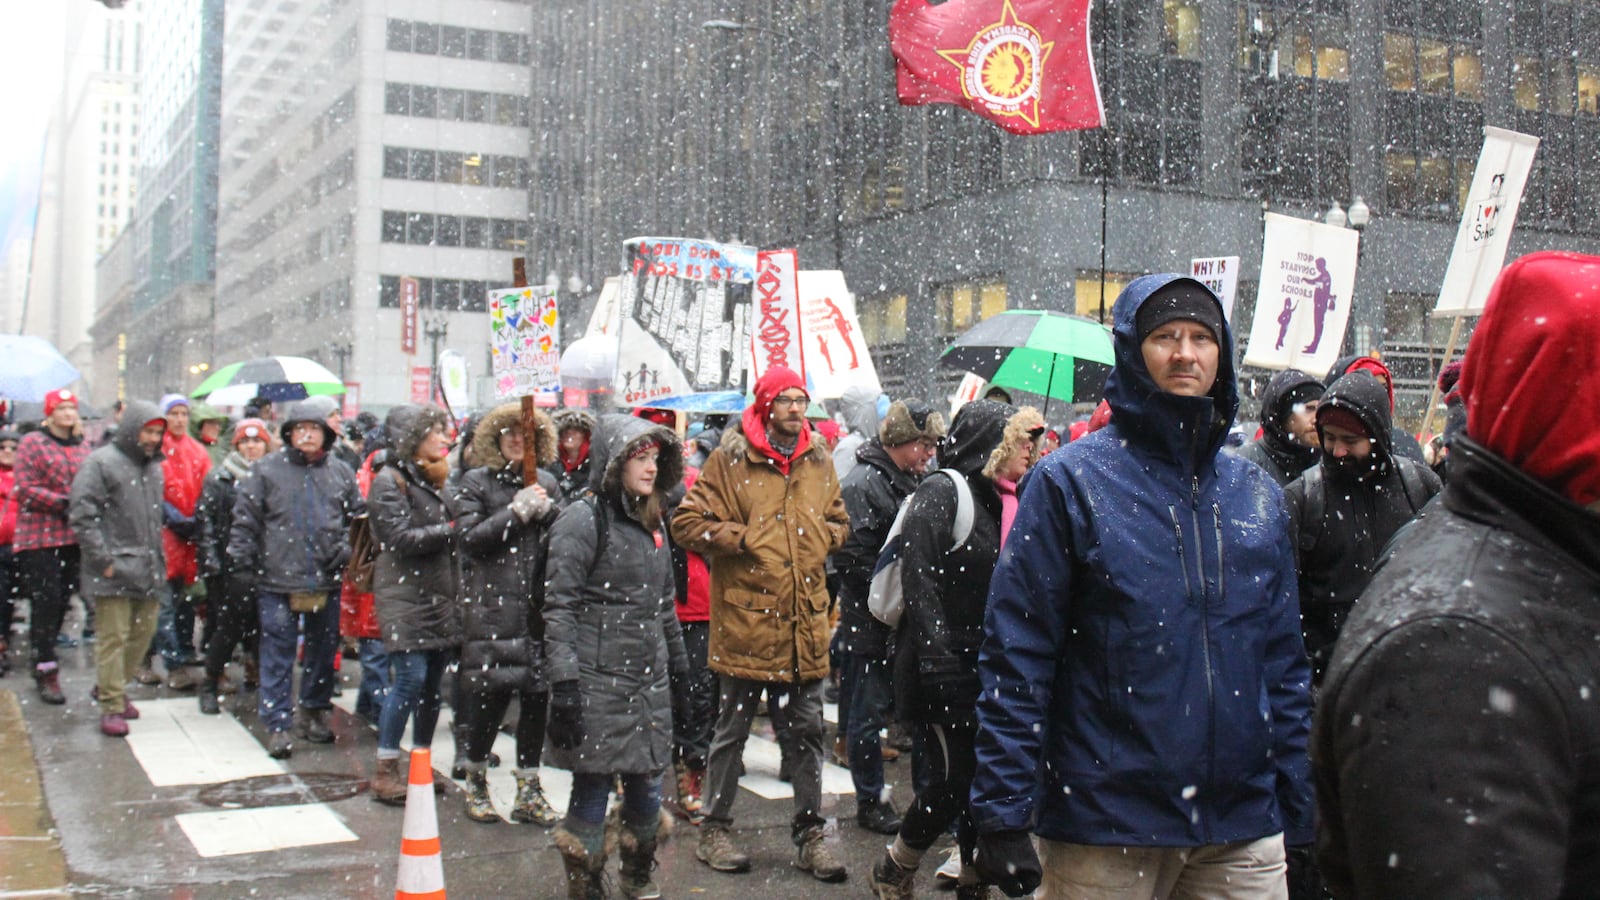 Protesters with the Chicago Teachers Union march in downtown Chicago on Oct. 31, 2019, to press for a contract.